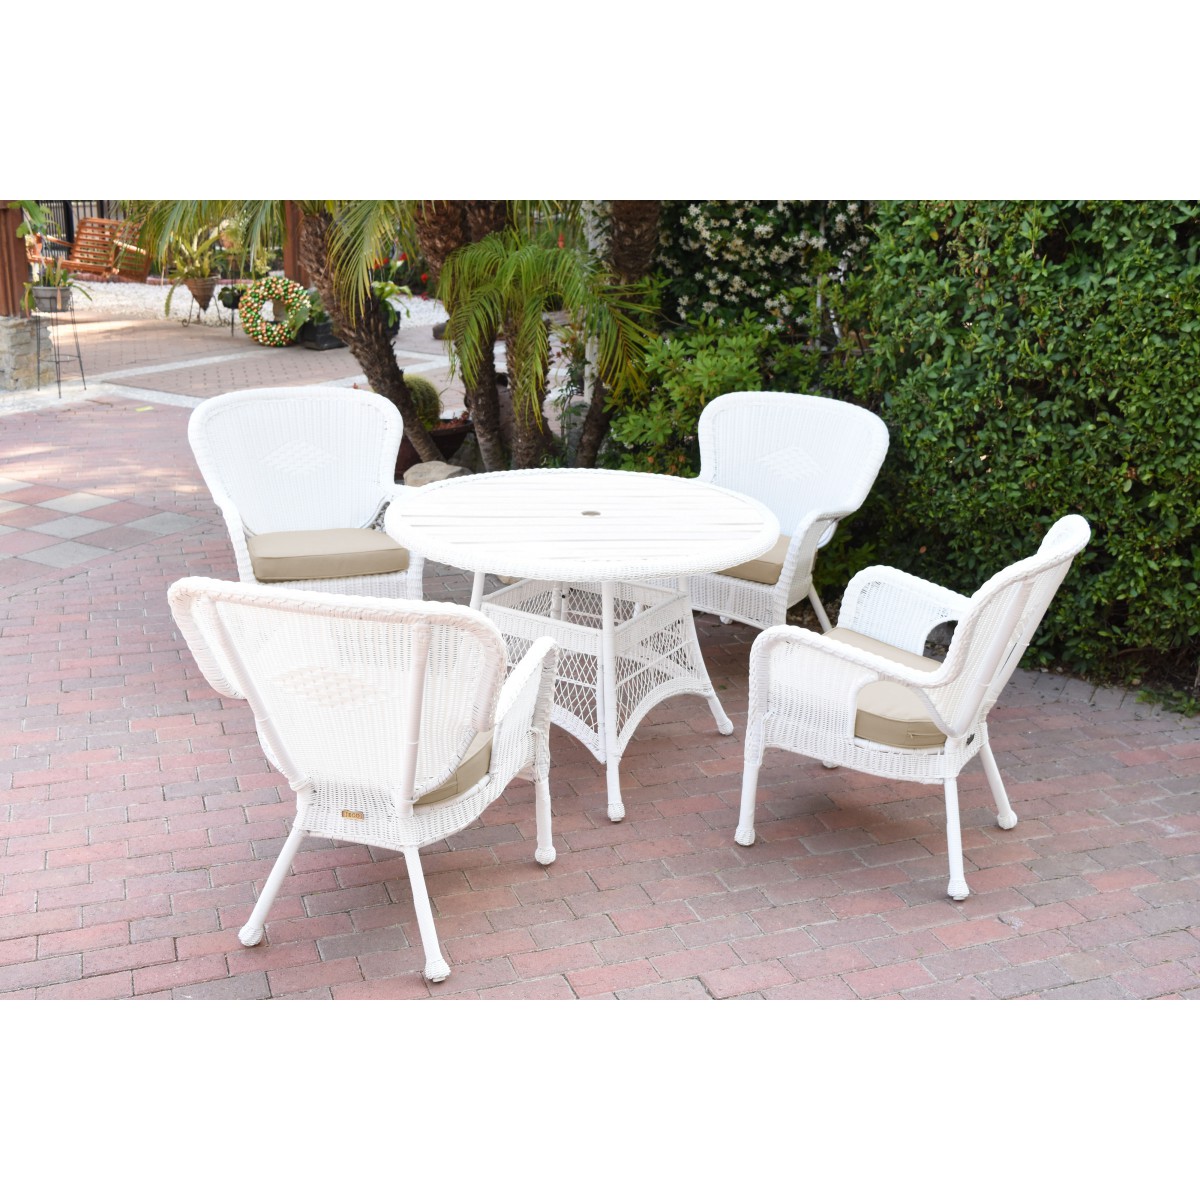 5pc Windsor white wicker dining set with faux wood top and 3 Inch tan